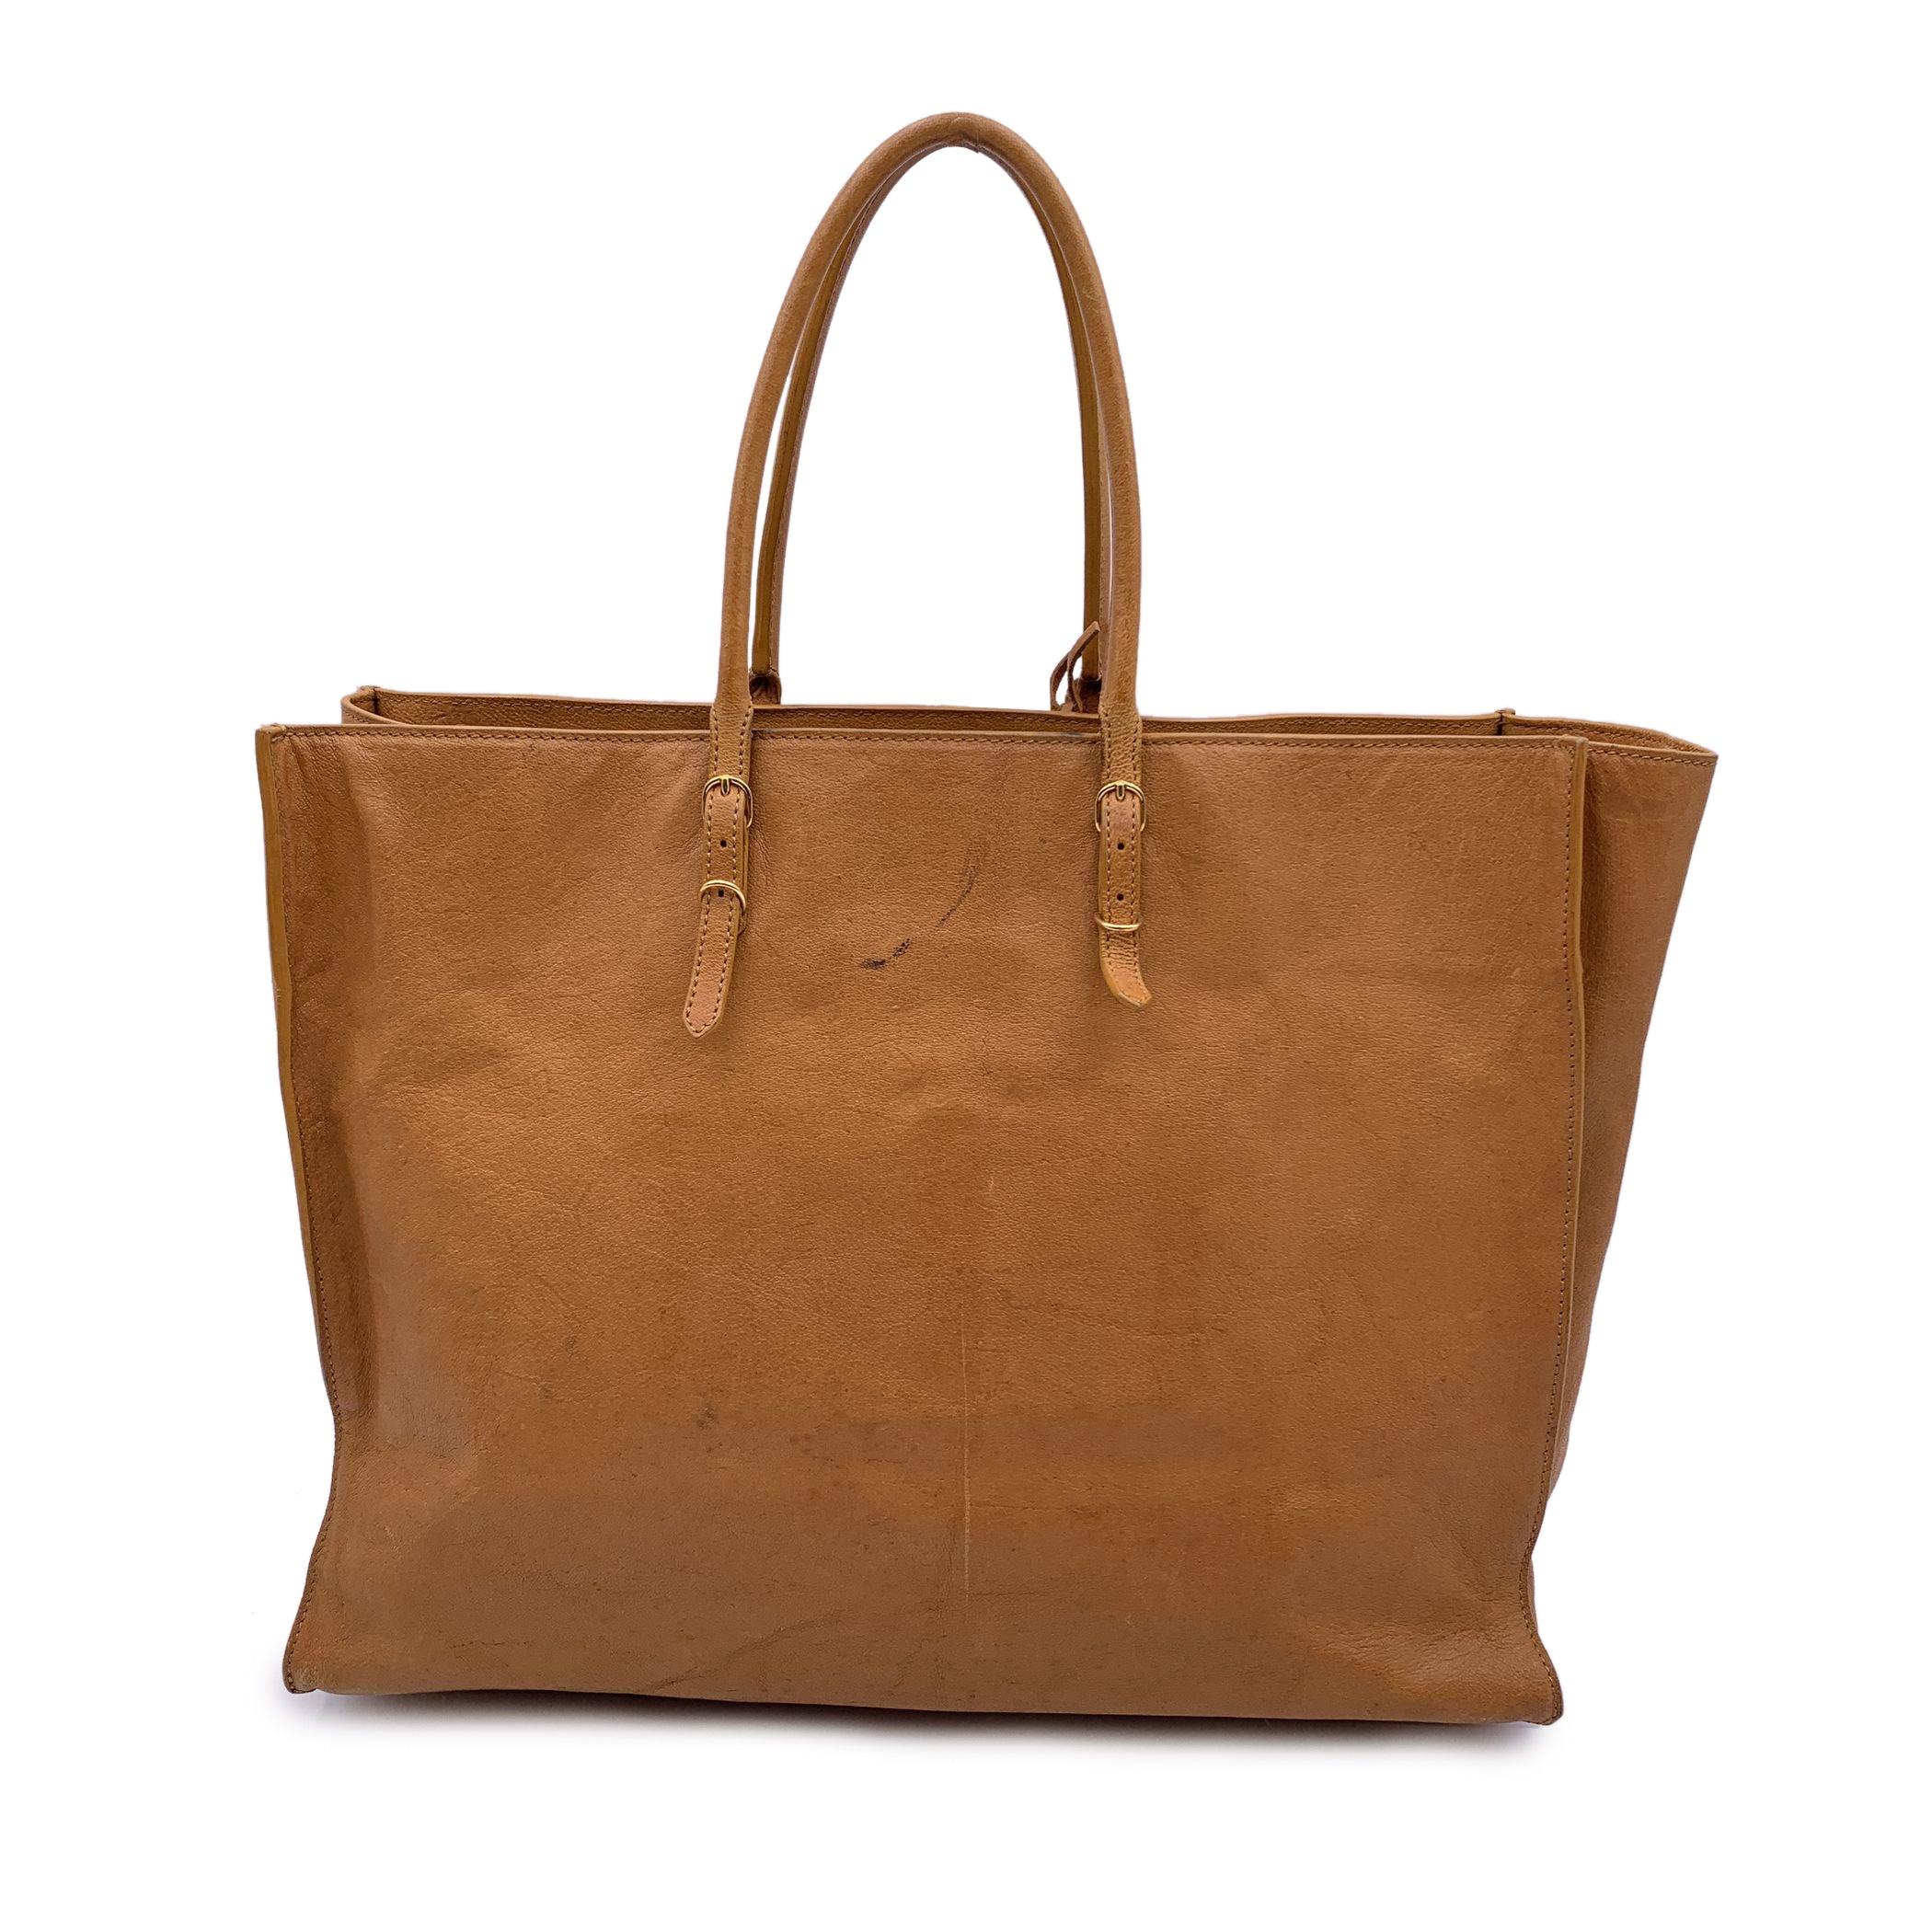 Balenciaga Beige Leather Papier A4 Large Tote Bag Handbag In Good Condition For Sale In Rome, Rome